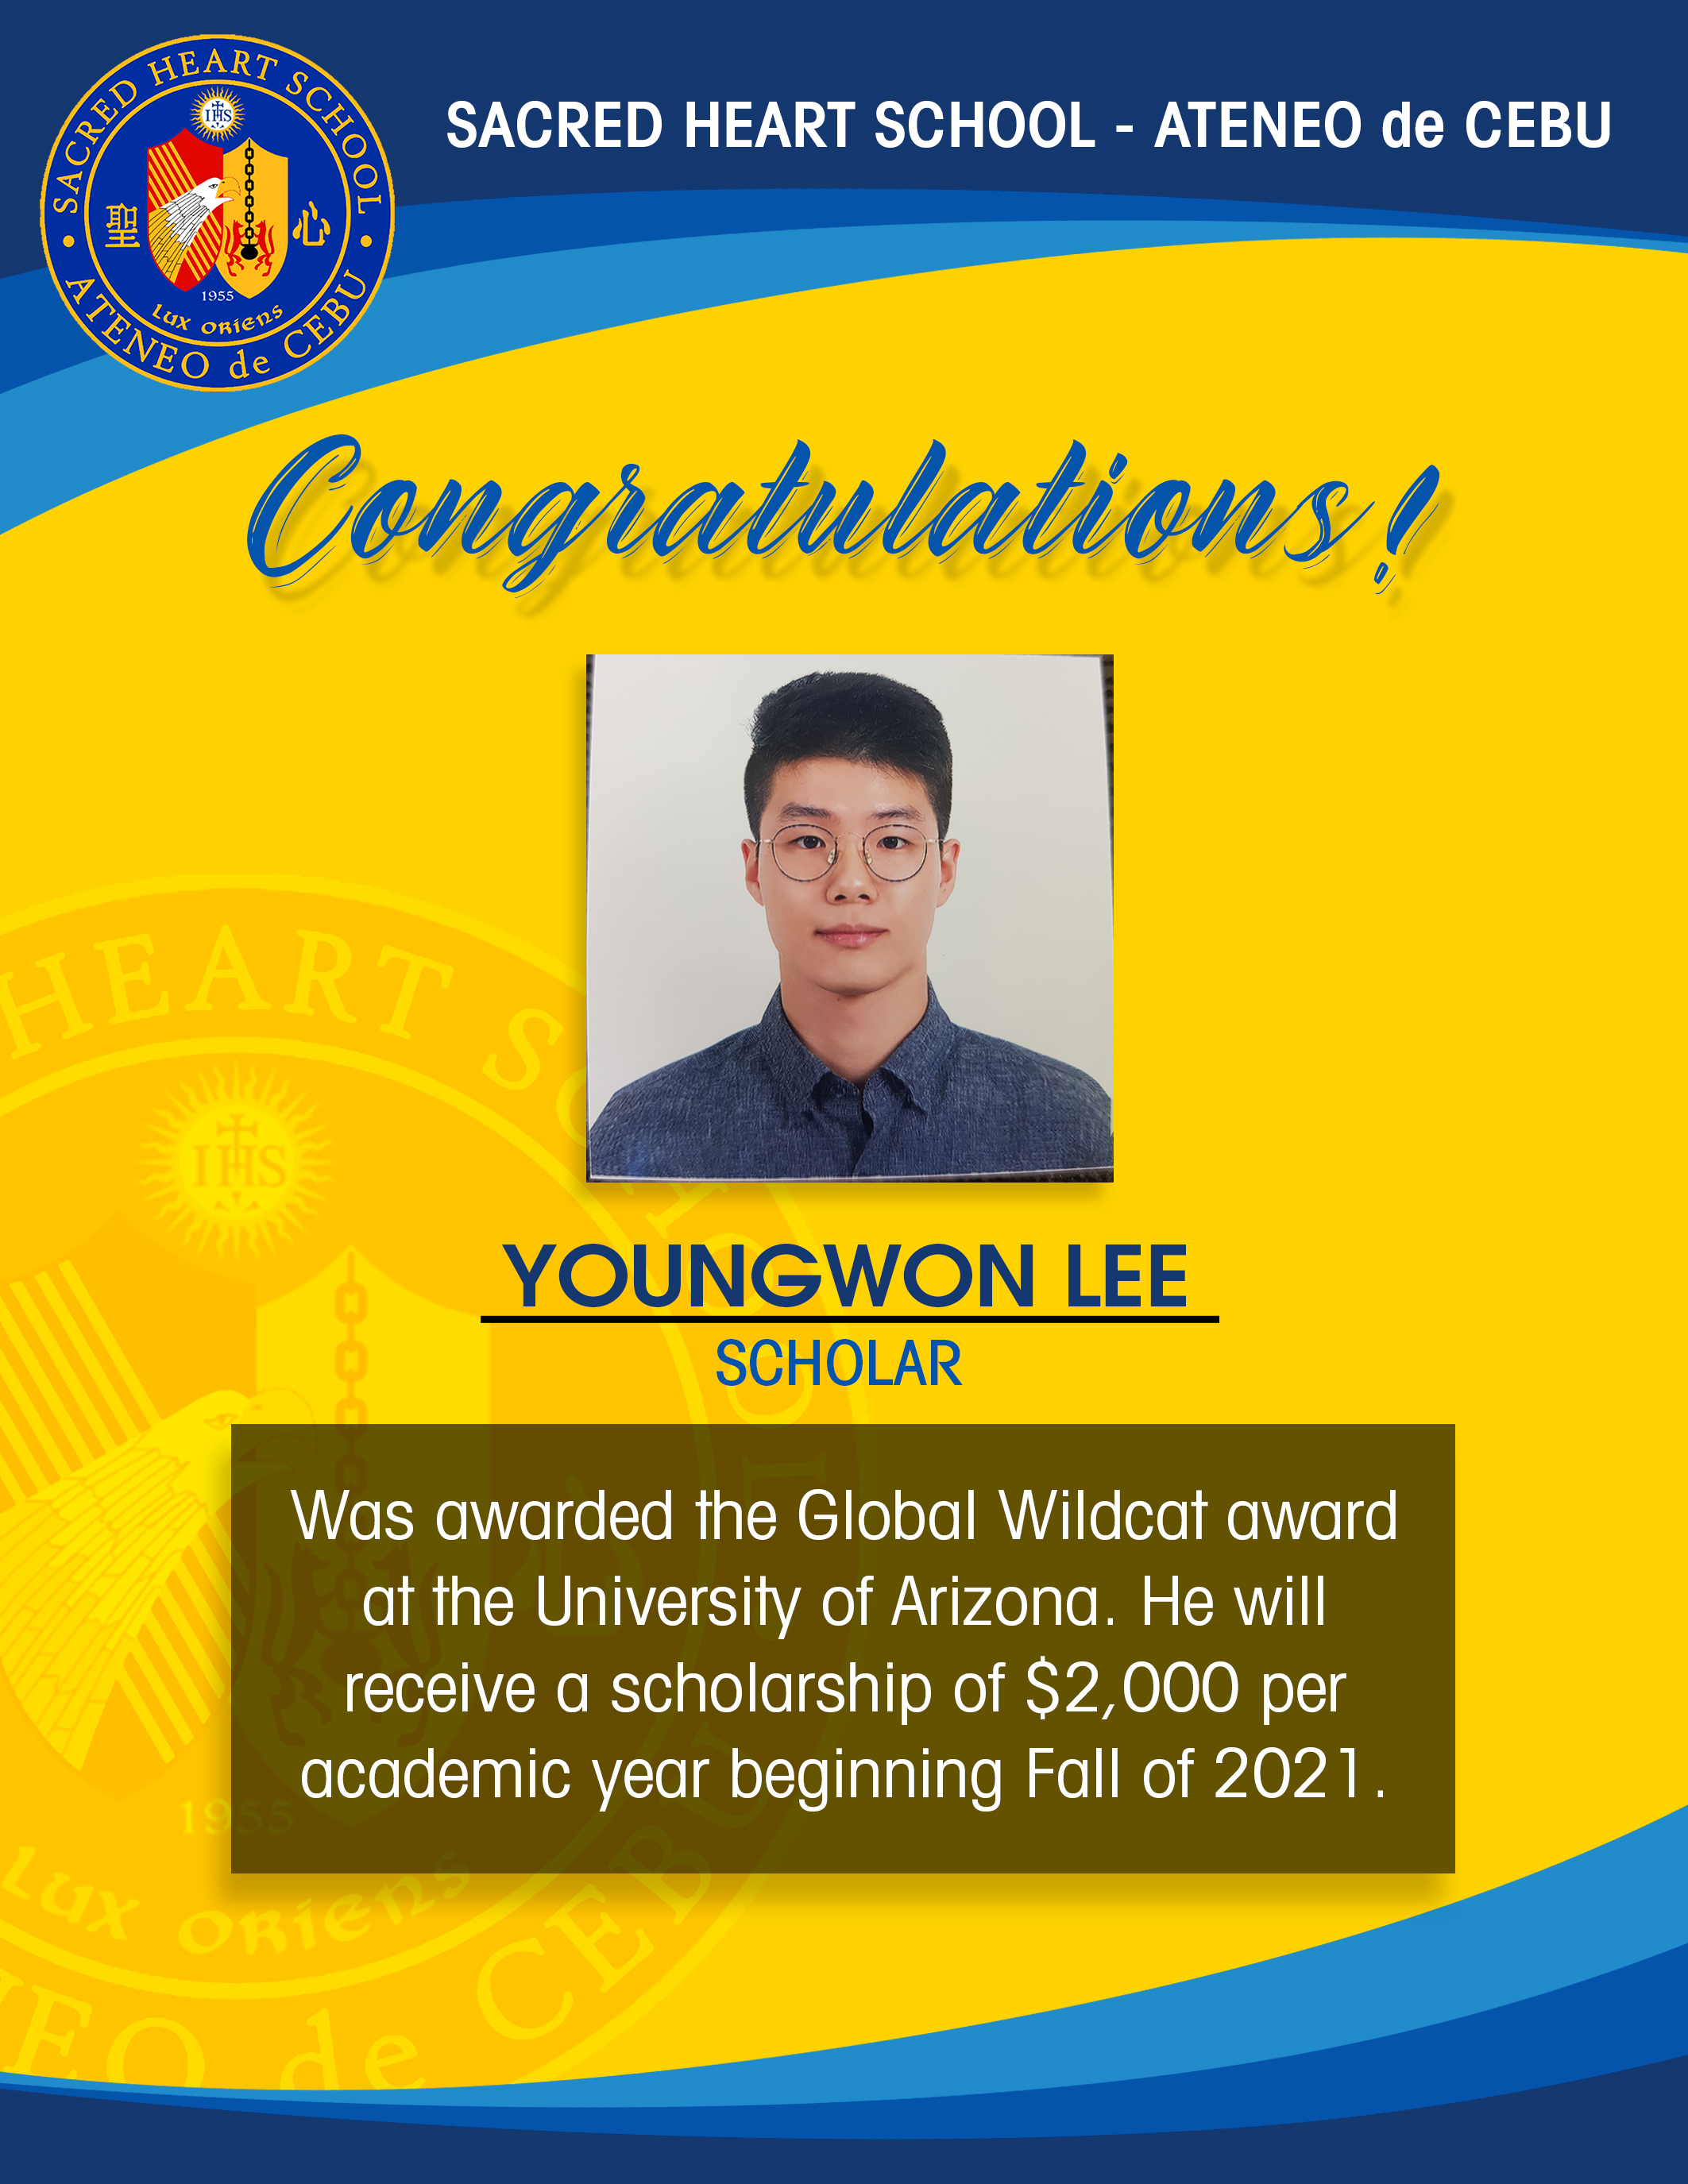 Youngwon Lee